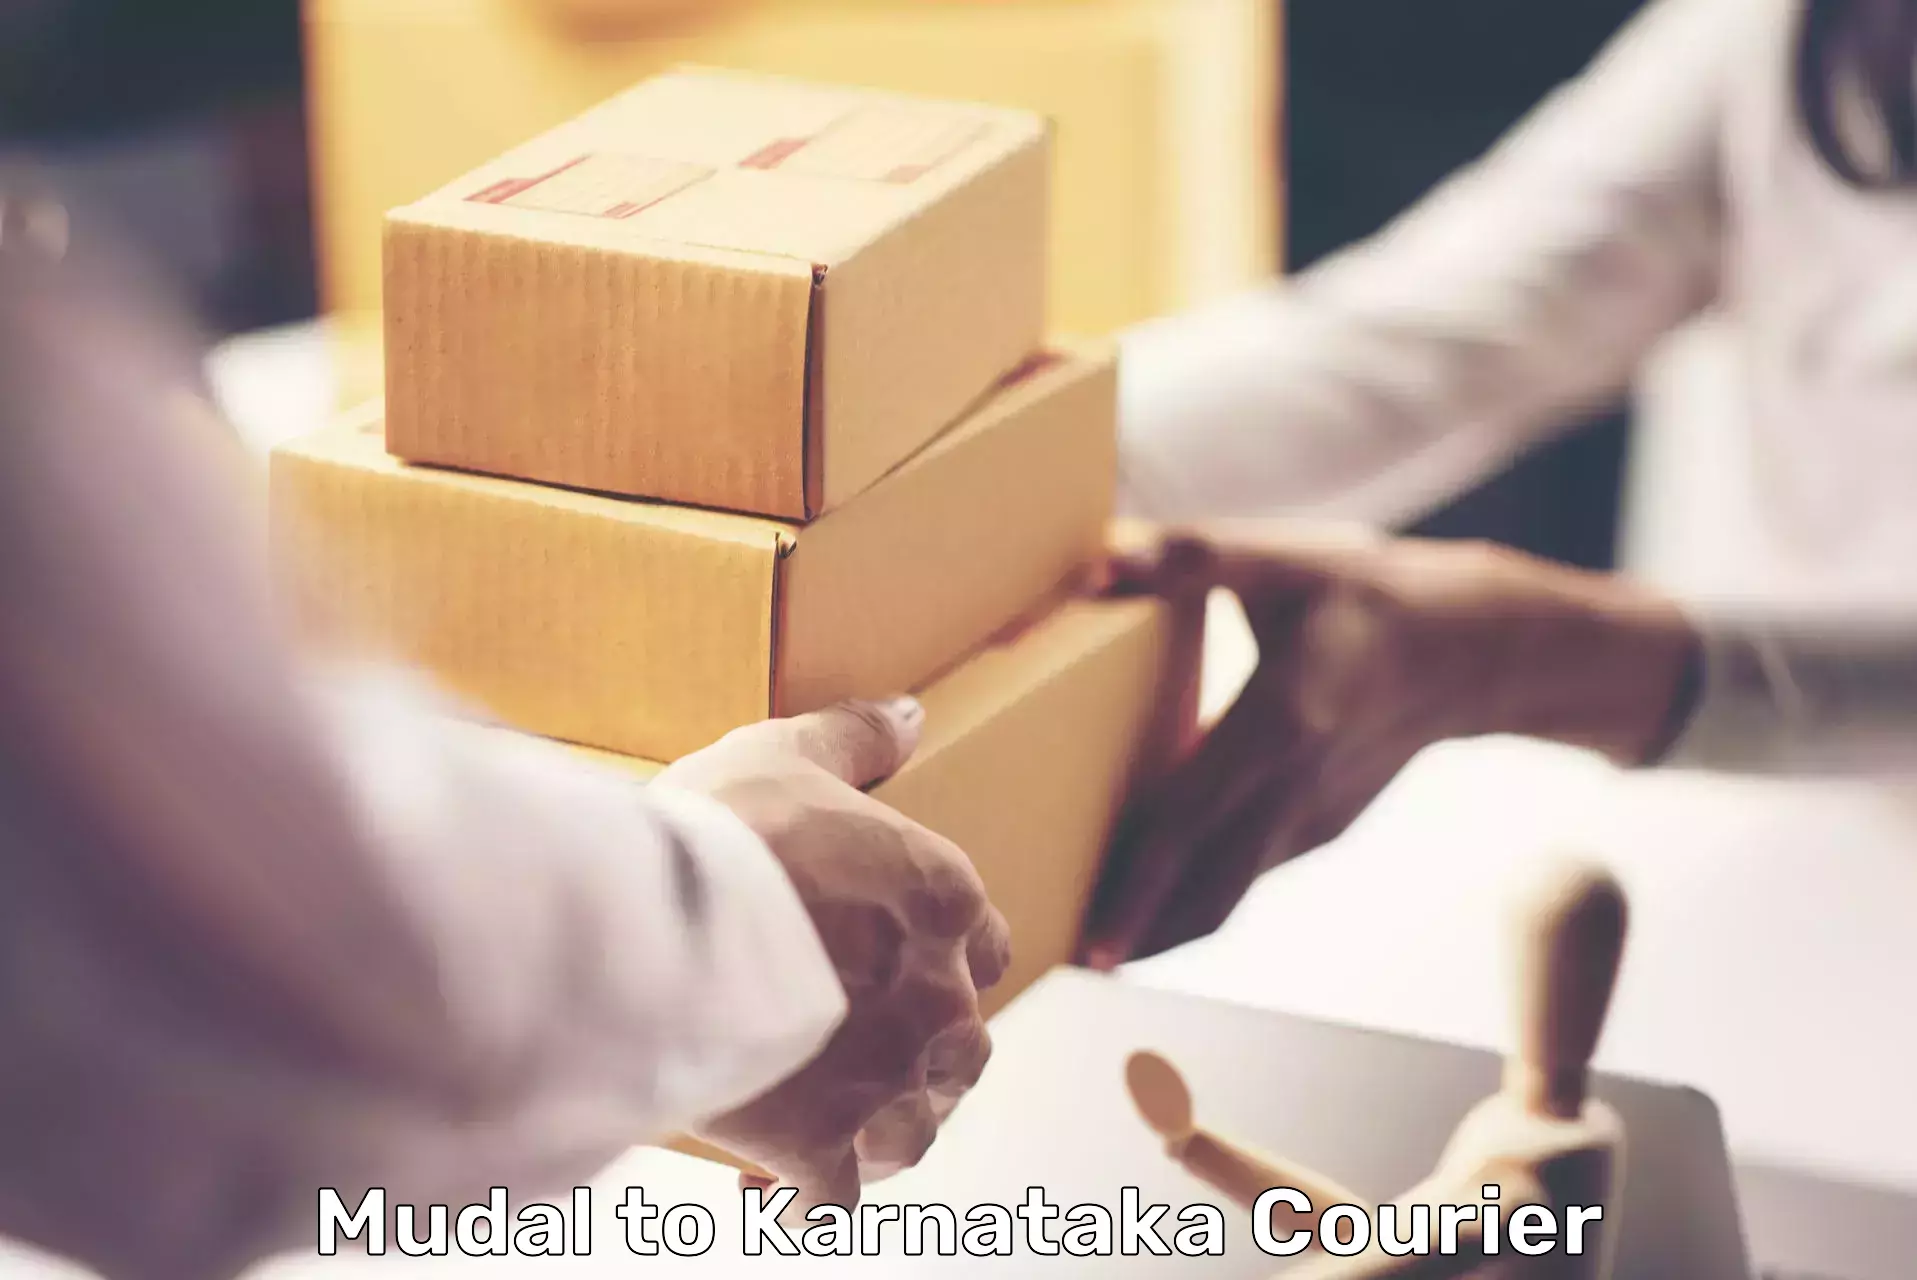 Reliable package handling Mudal to Bhatkal